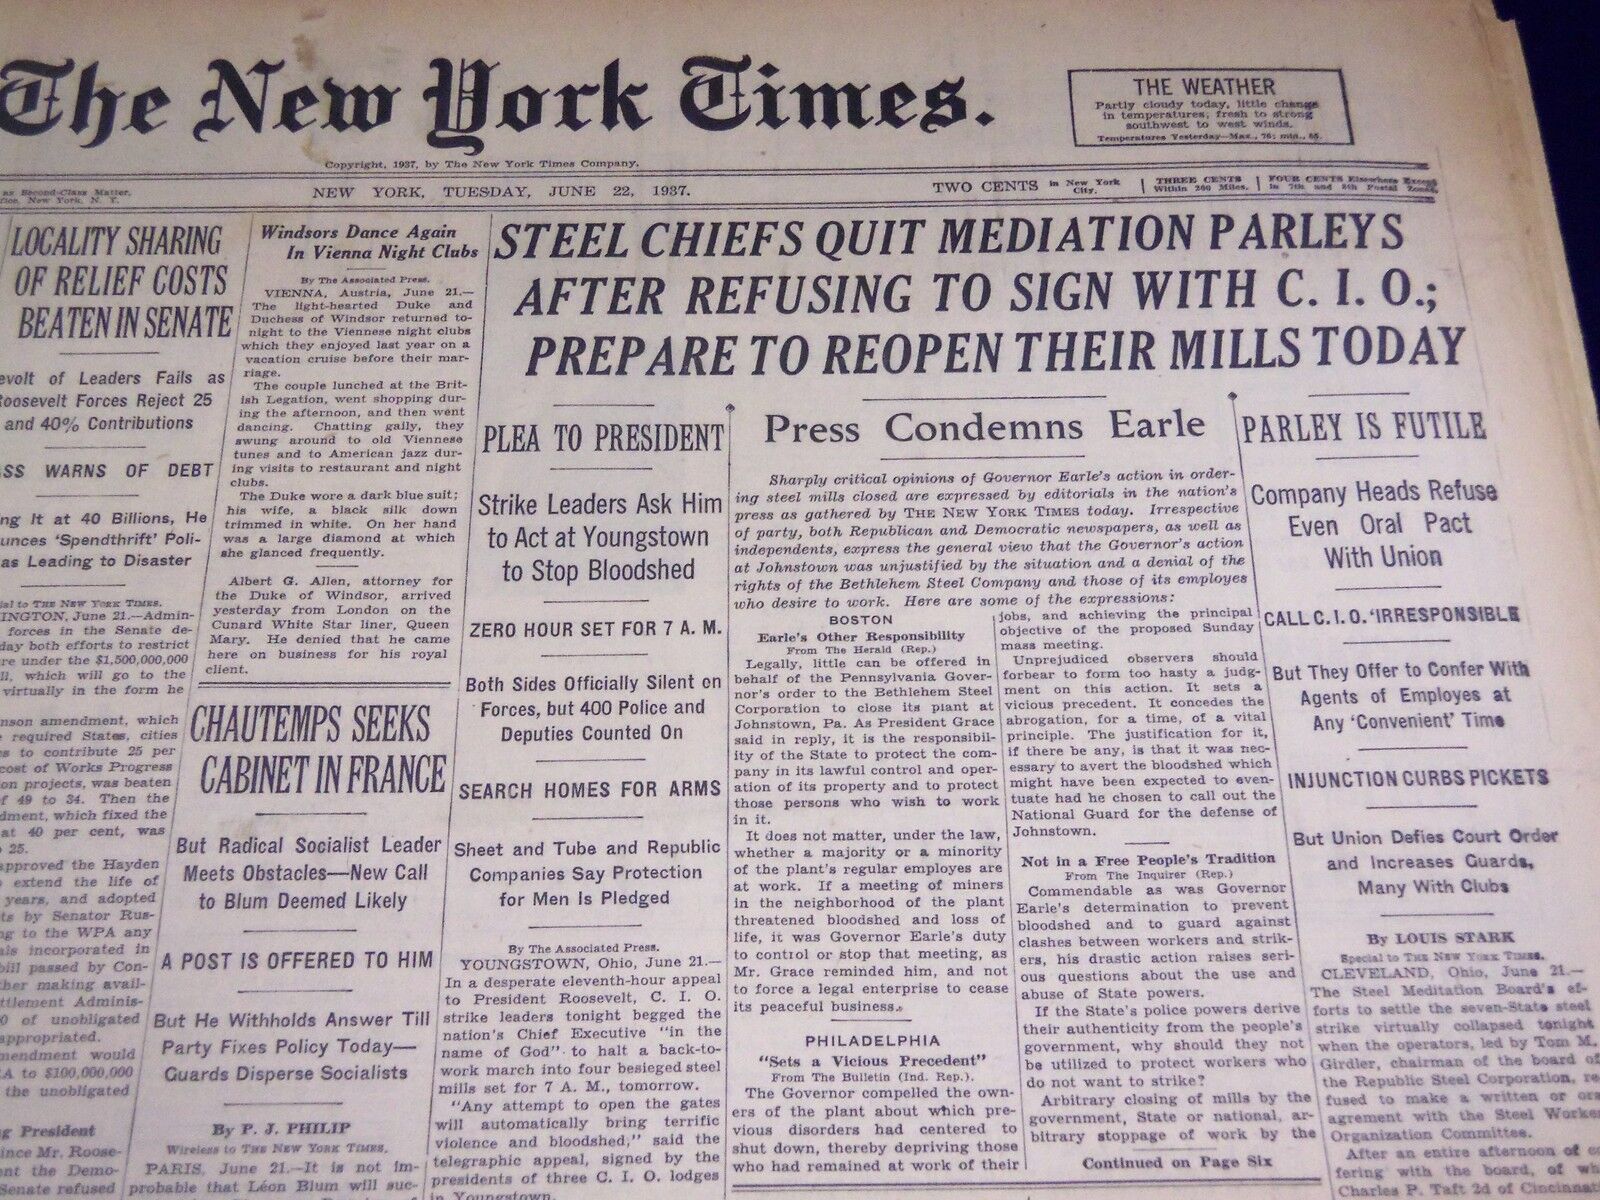 1937 JUNE 22 NEW YORK TIMES - STEEL CHIEFS QUIT MEDIATION PARLEYS - NT 1281